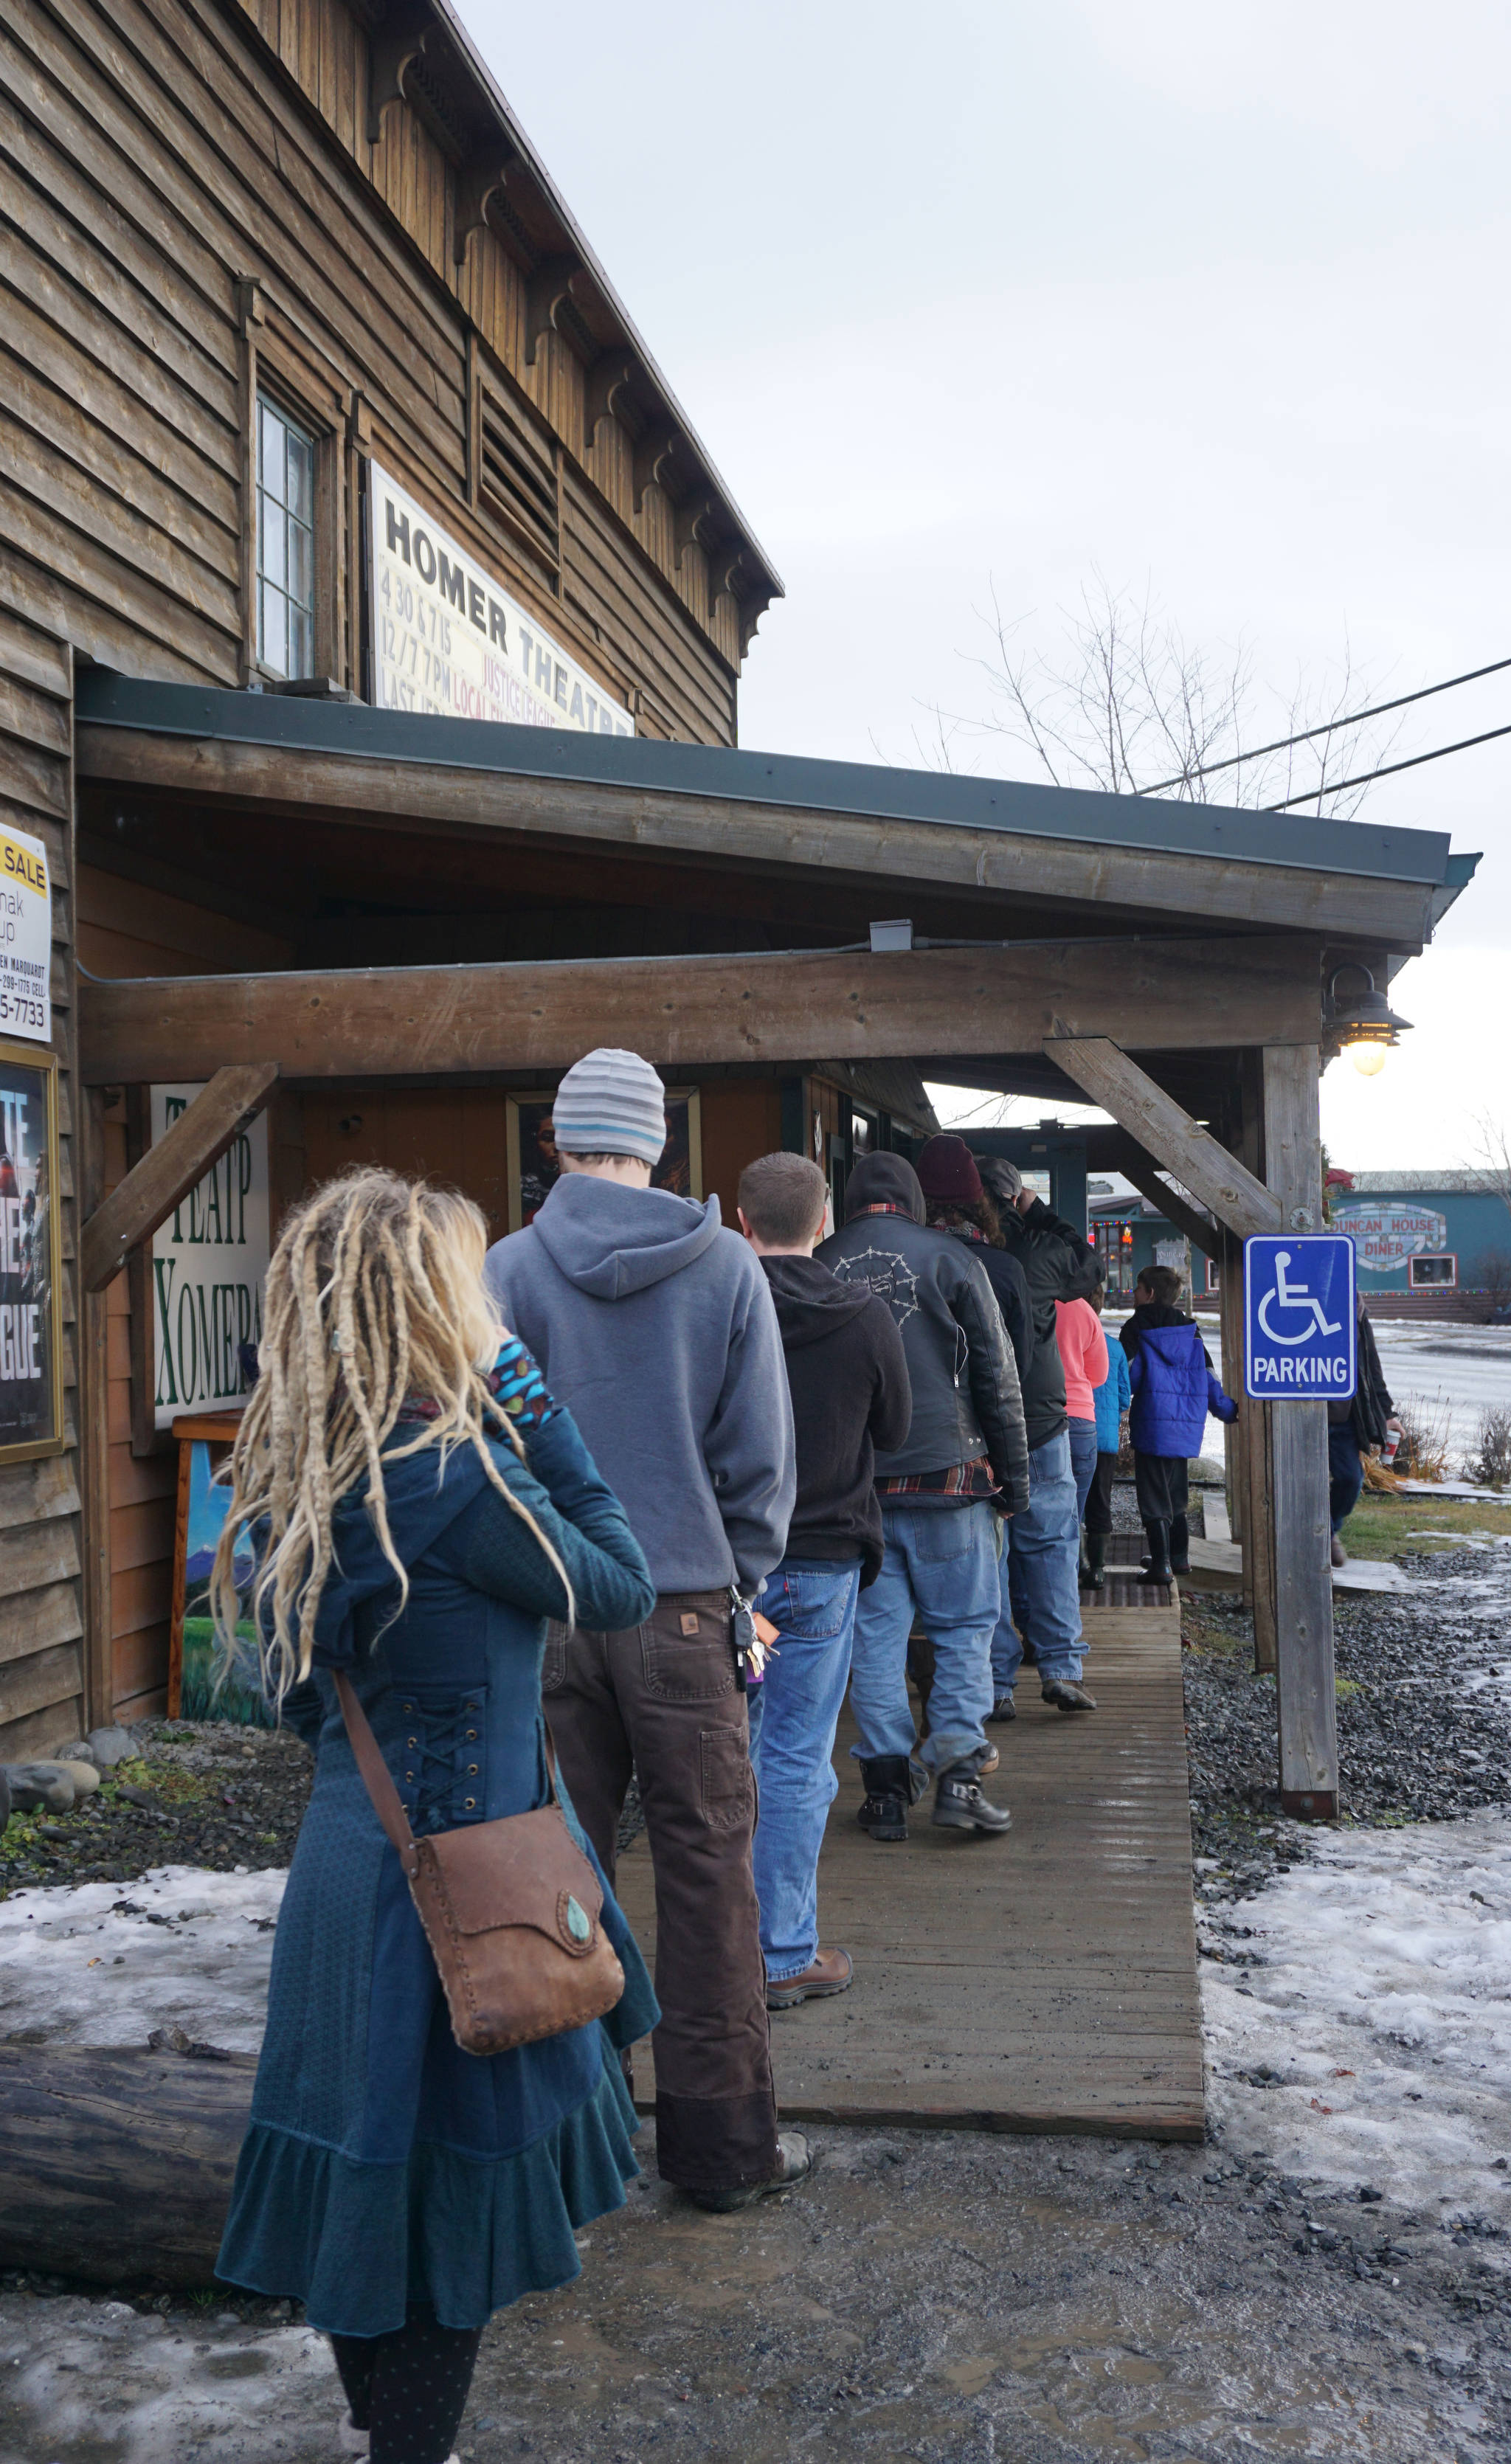 A line of about 25 people wait to buy tickets for the Homer premiers of “Star Wars: The Last Jedi” about noon Saturday, Dec. 2, 2017, at the Homer Theatre in Homer, Alaska. Tickets went on sale for a gala opening night on Dec. 14 as well as shows that weekend. (Photo by Michael Armstrong, Homer News)